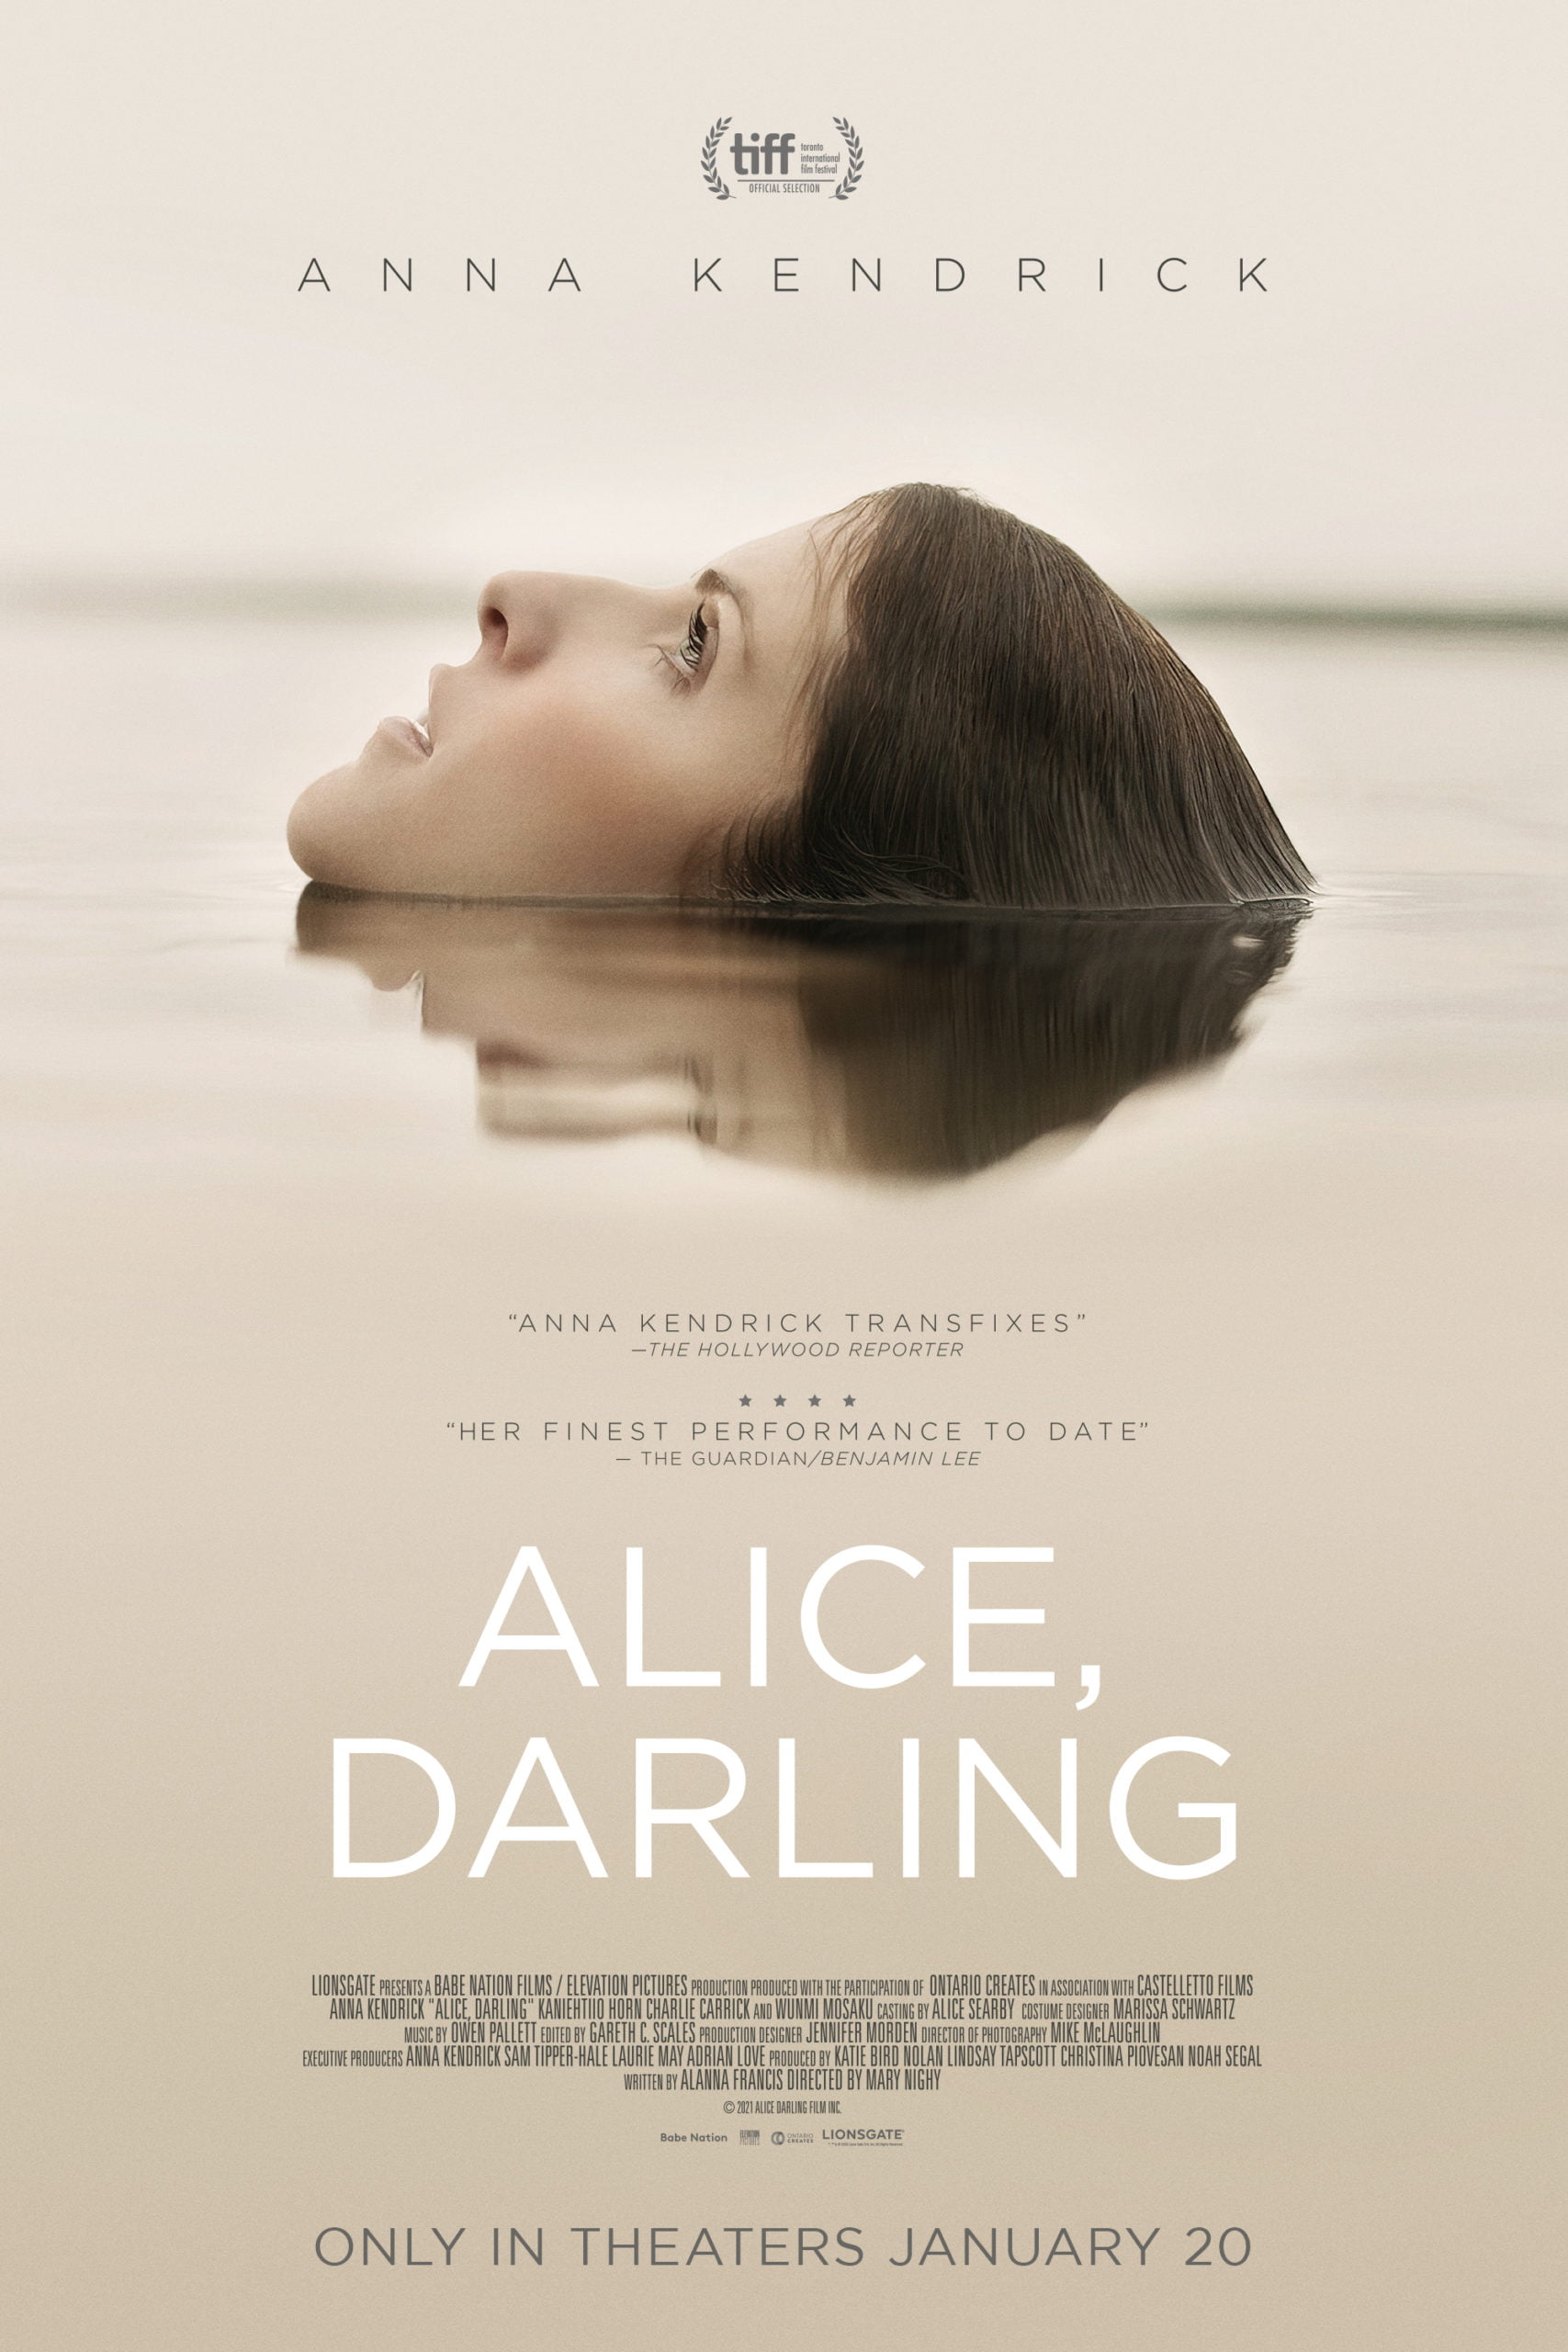 Alice, Darling Movie 2022, Official Trailer, Release Date